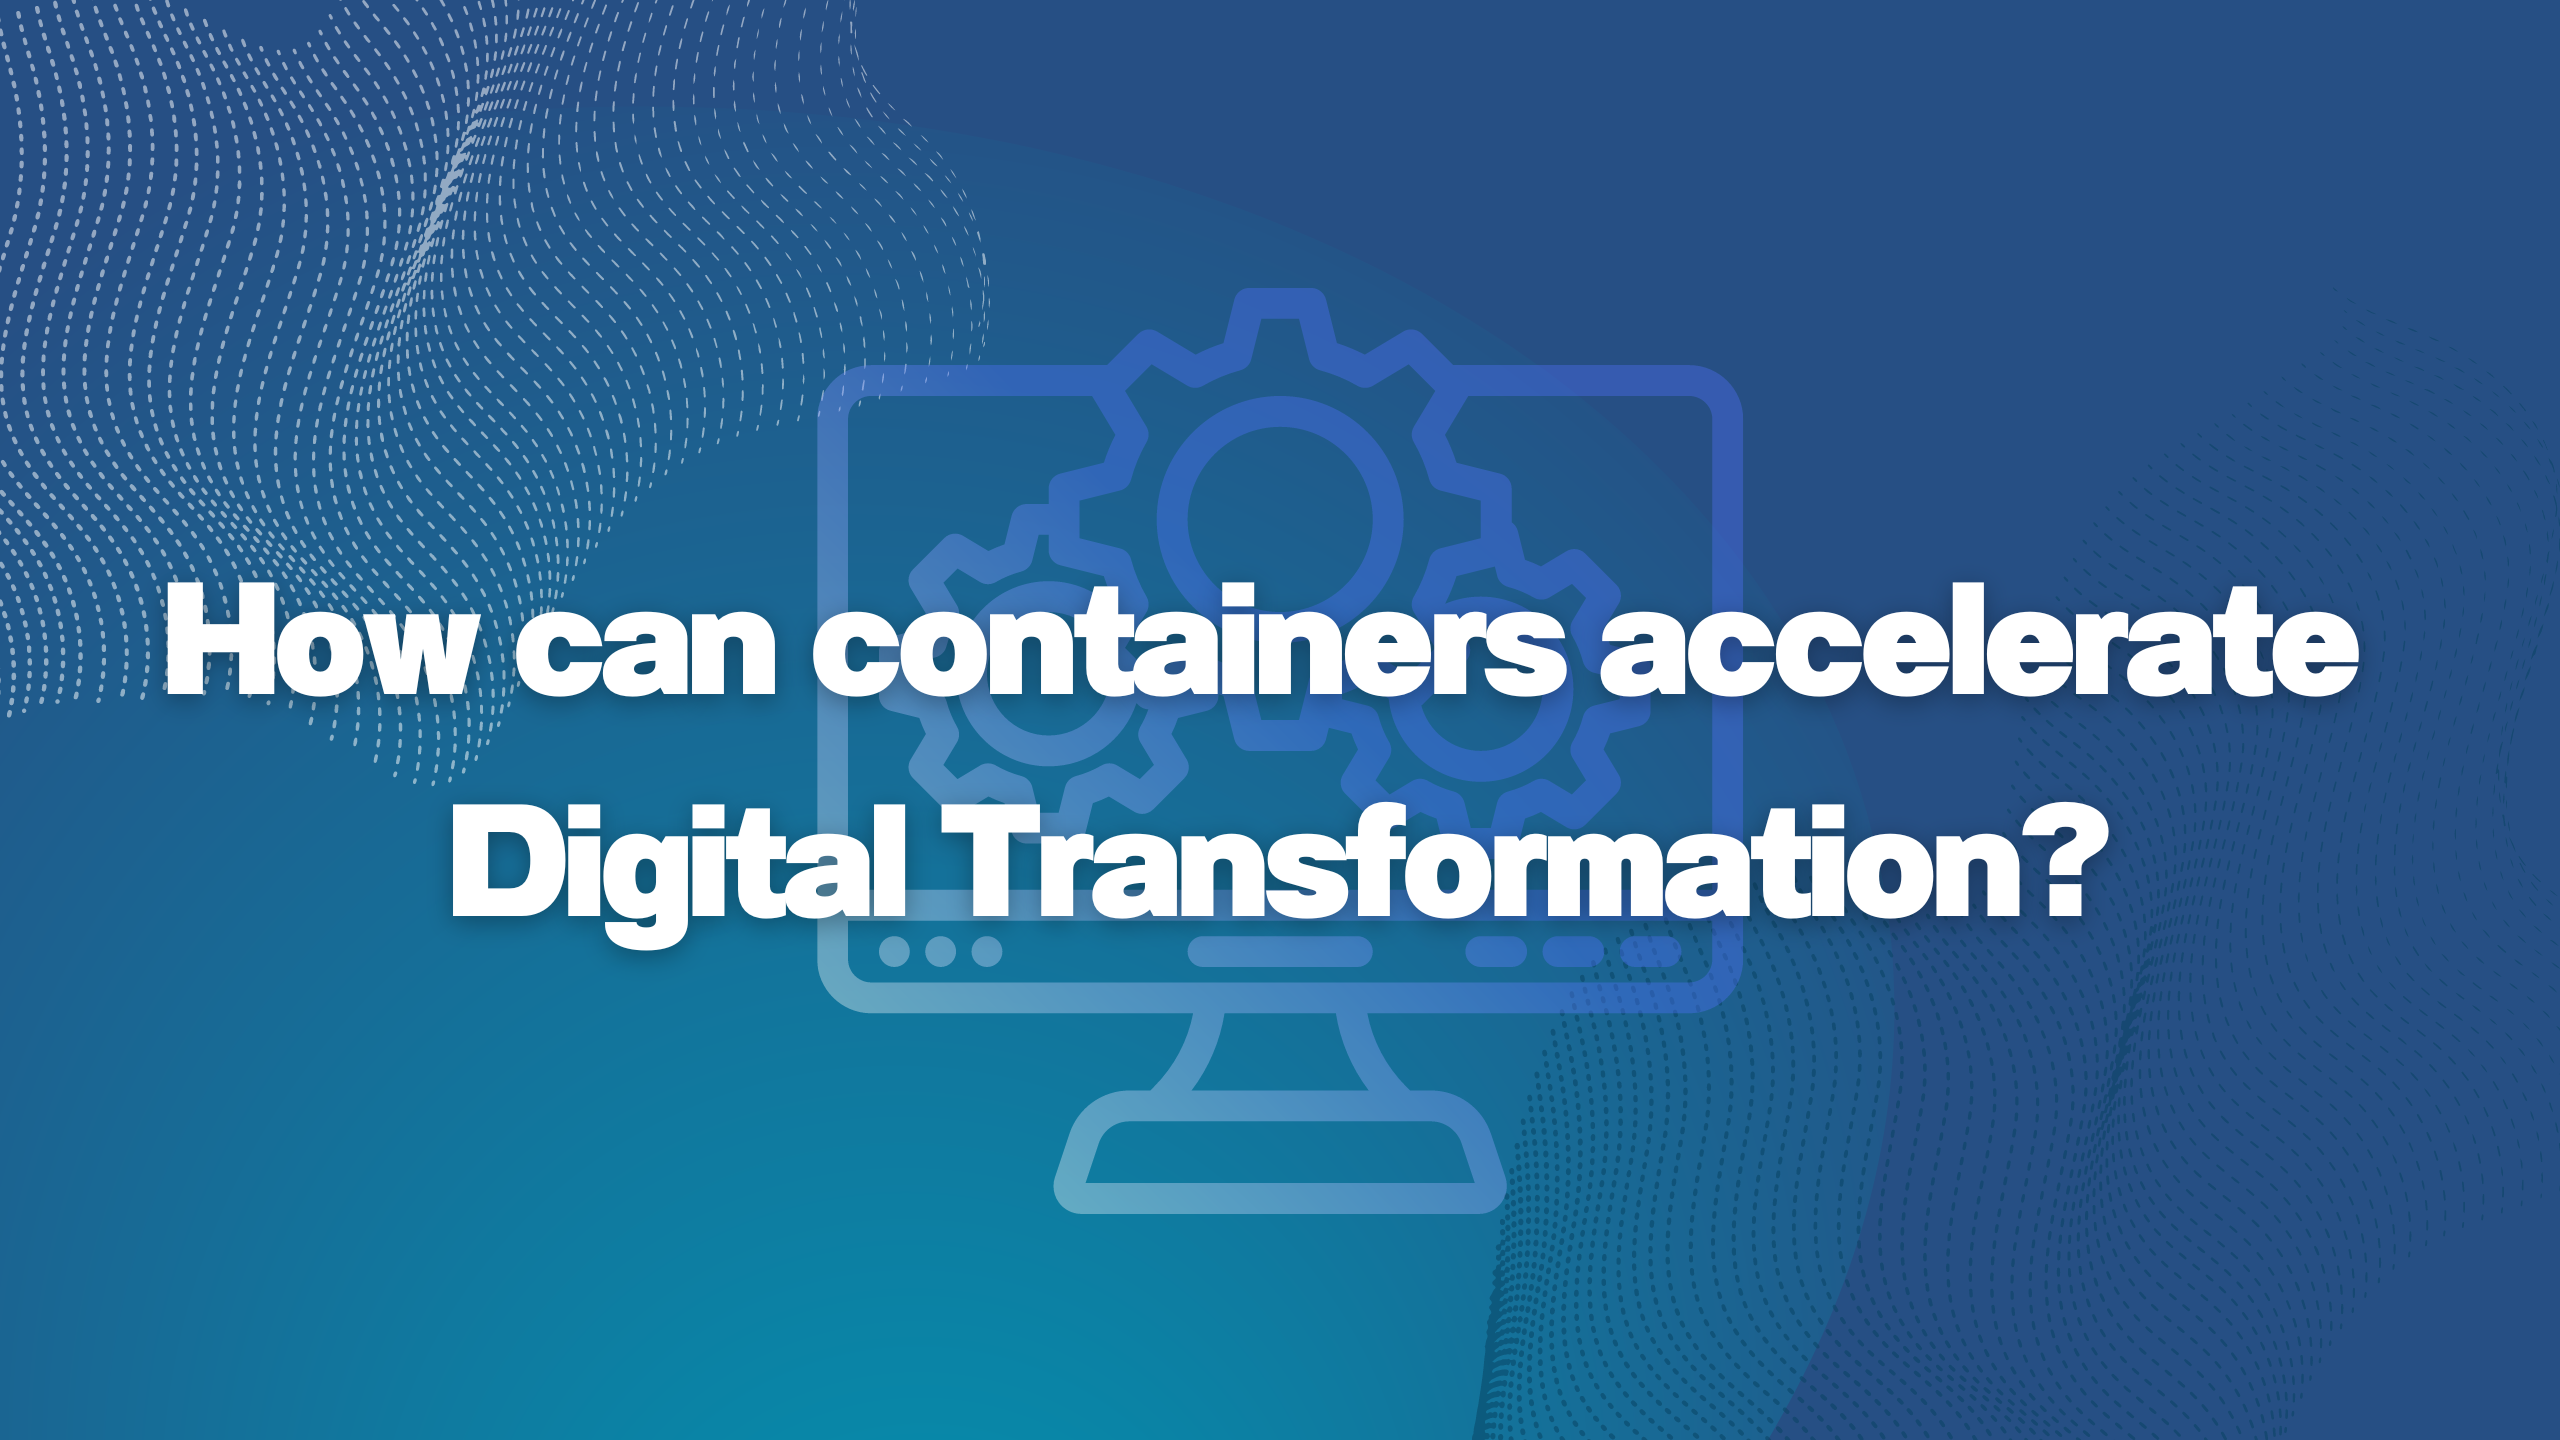 Containers to accelerate Digital transformation